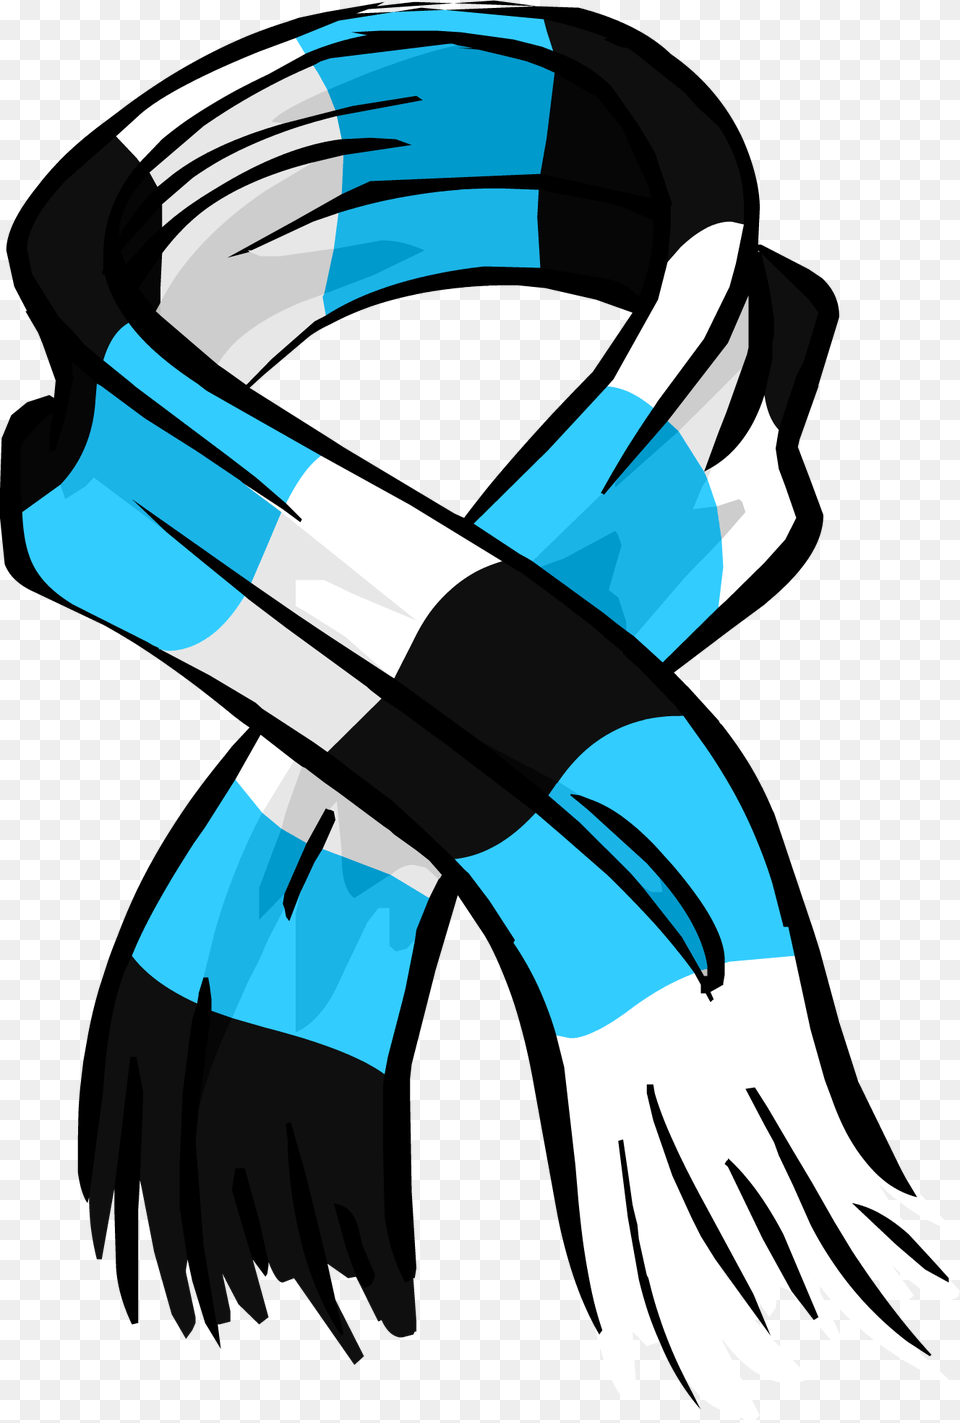 Blue Striped Scarf Club Penguin Scarf, Clothing, Adult, Female, Person Png Image